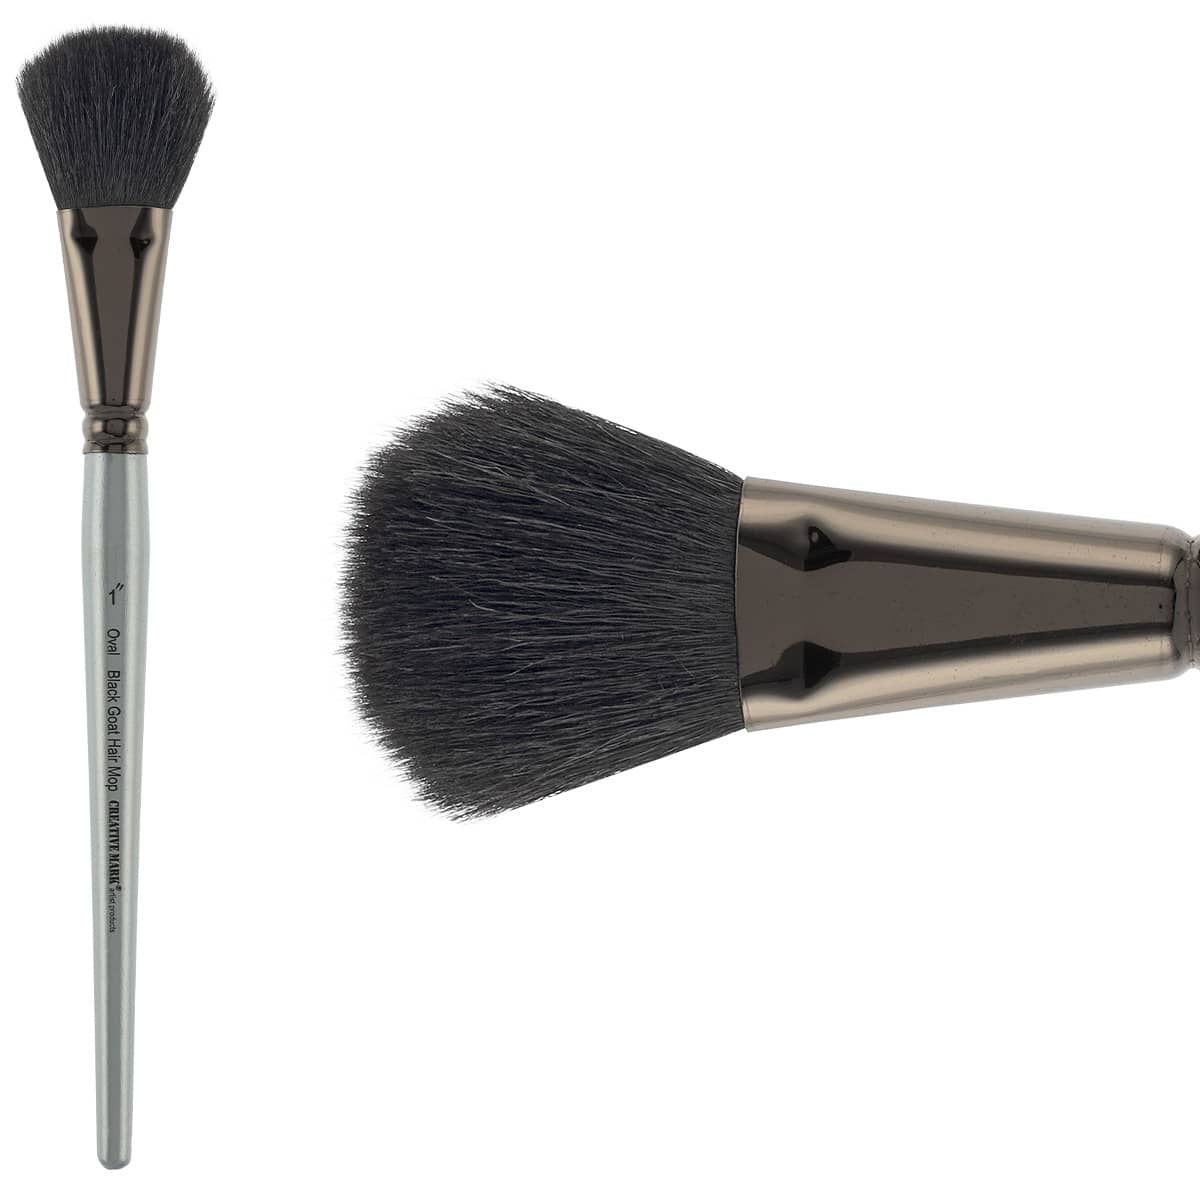 Includes a Size 1 inch Oval Black Goat Hair Mop Brush